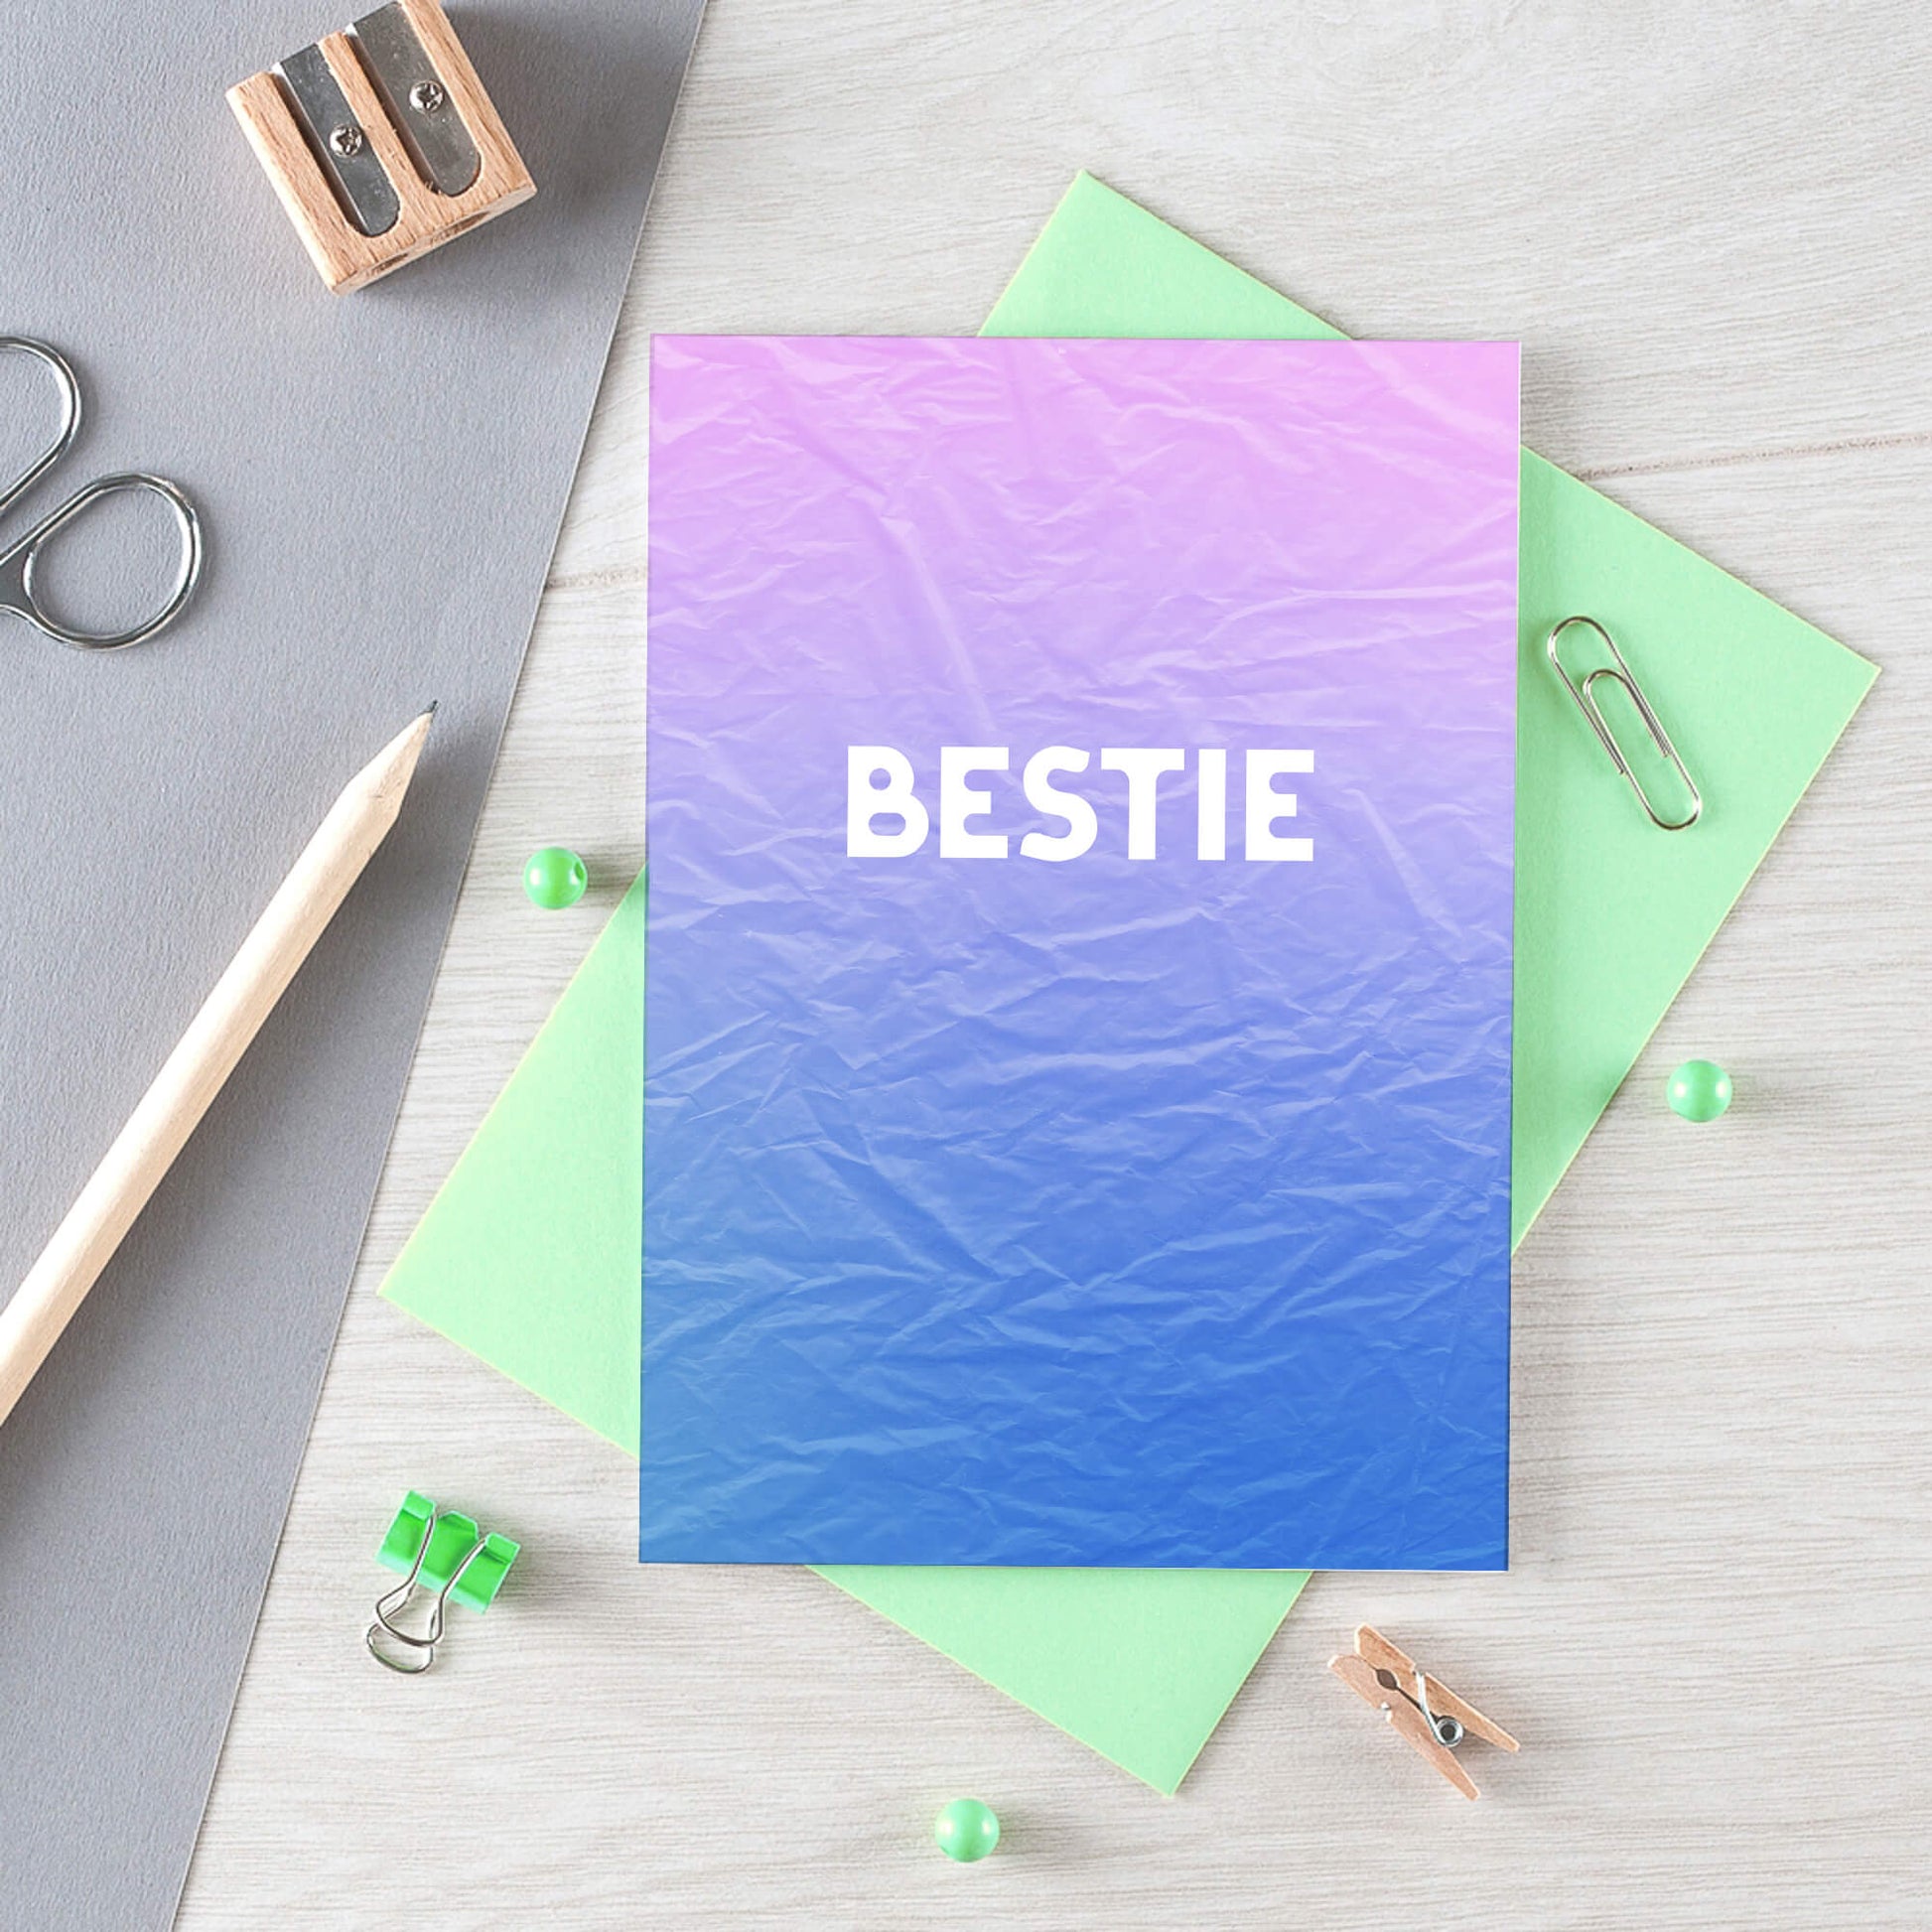 Bestie Card by SixElevenCreations. Product Code SE4005A6